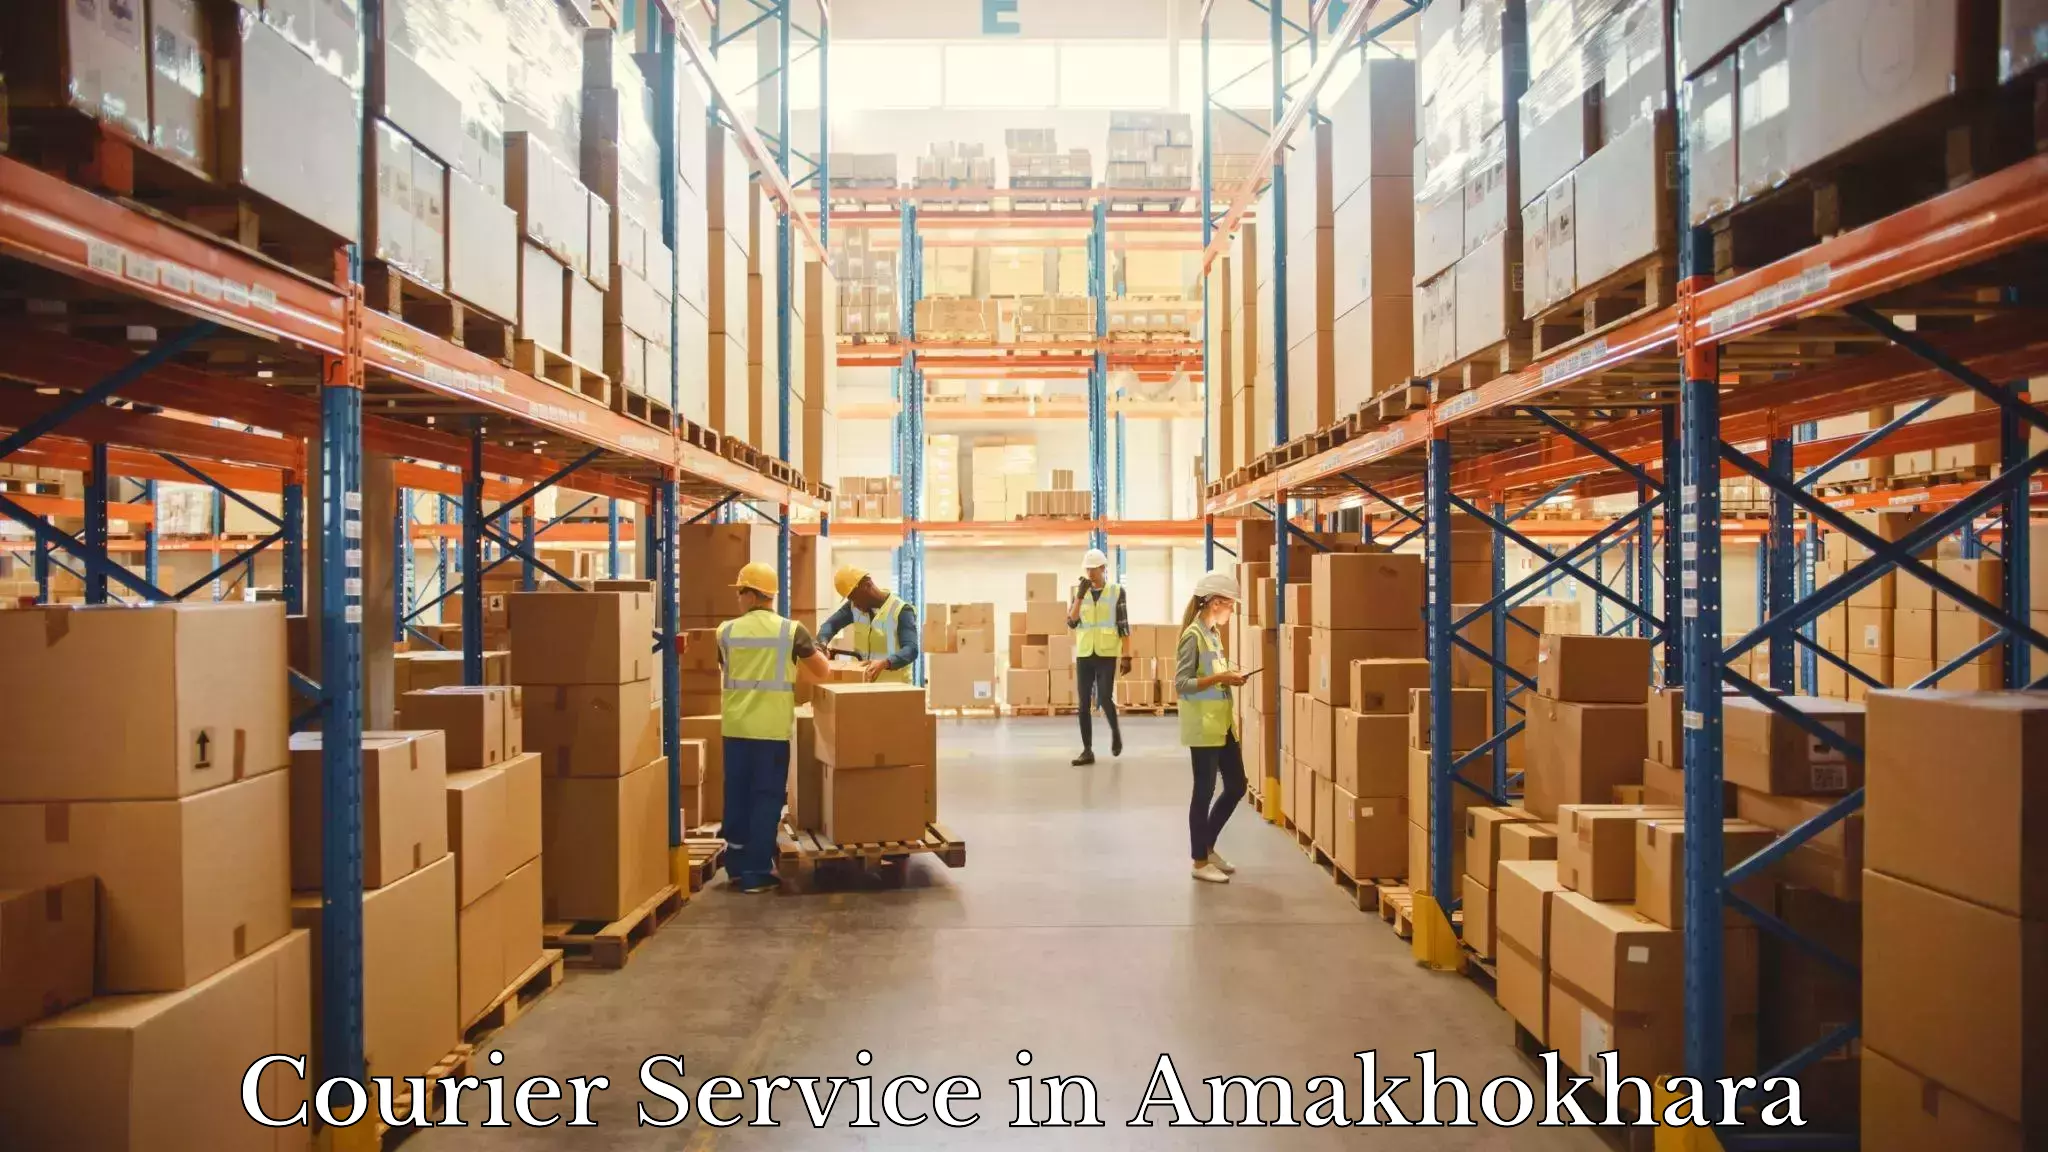 On-time delivery services in Amakhokhara